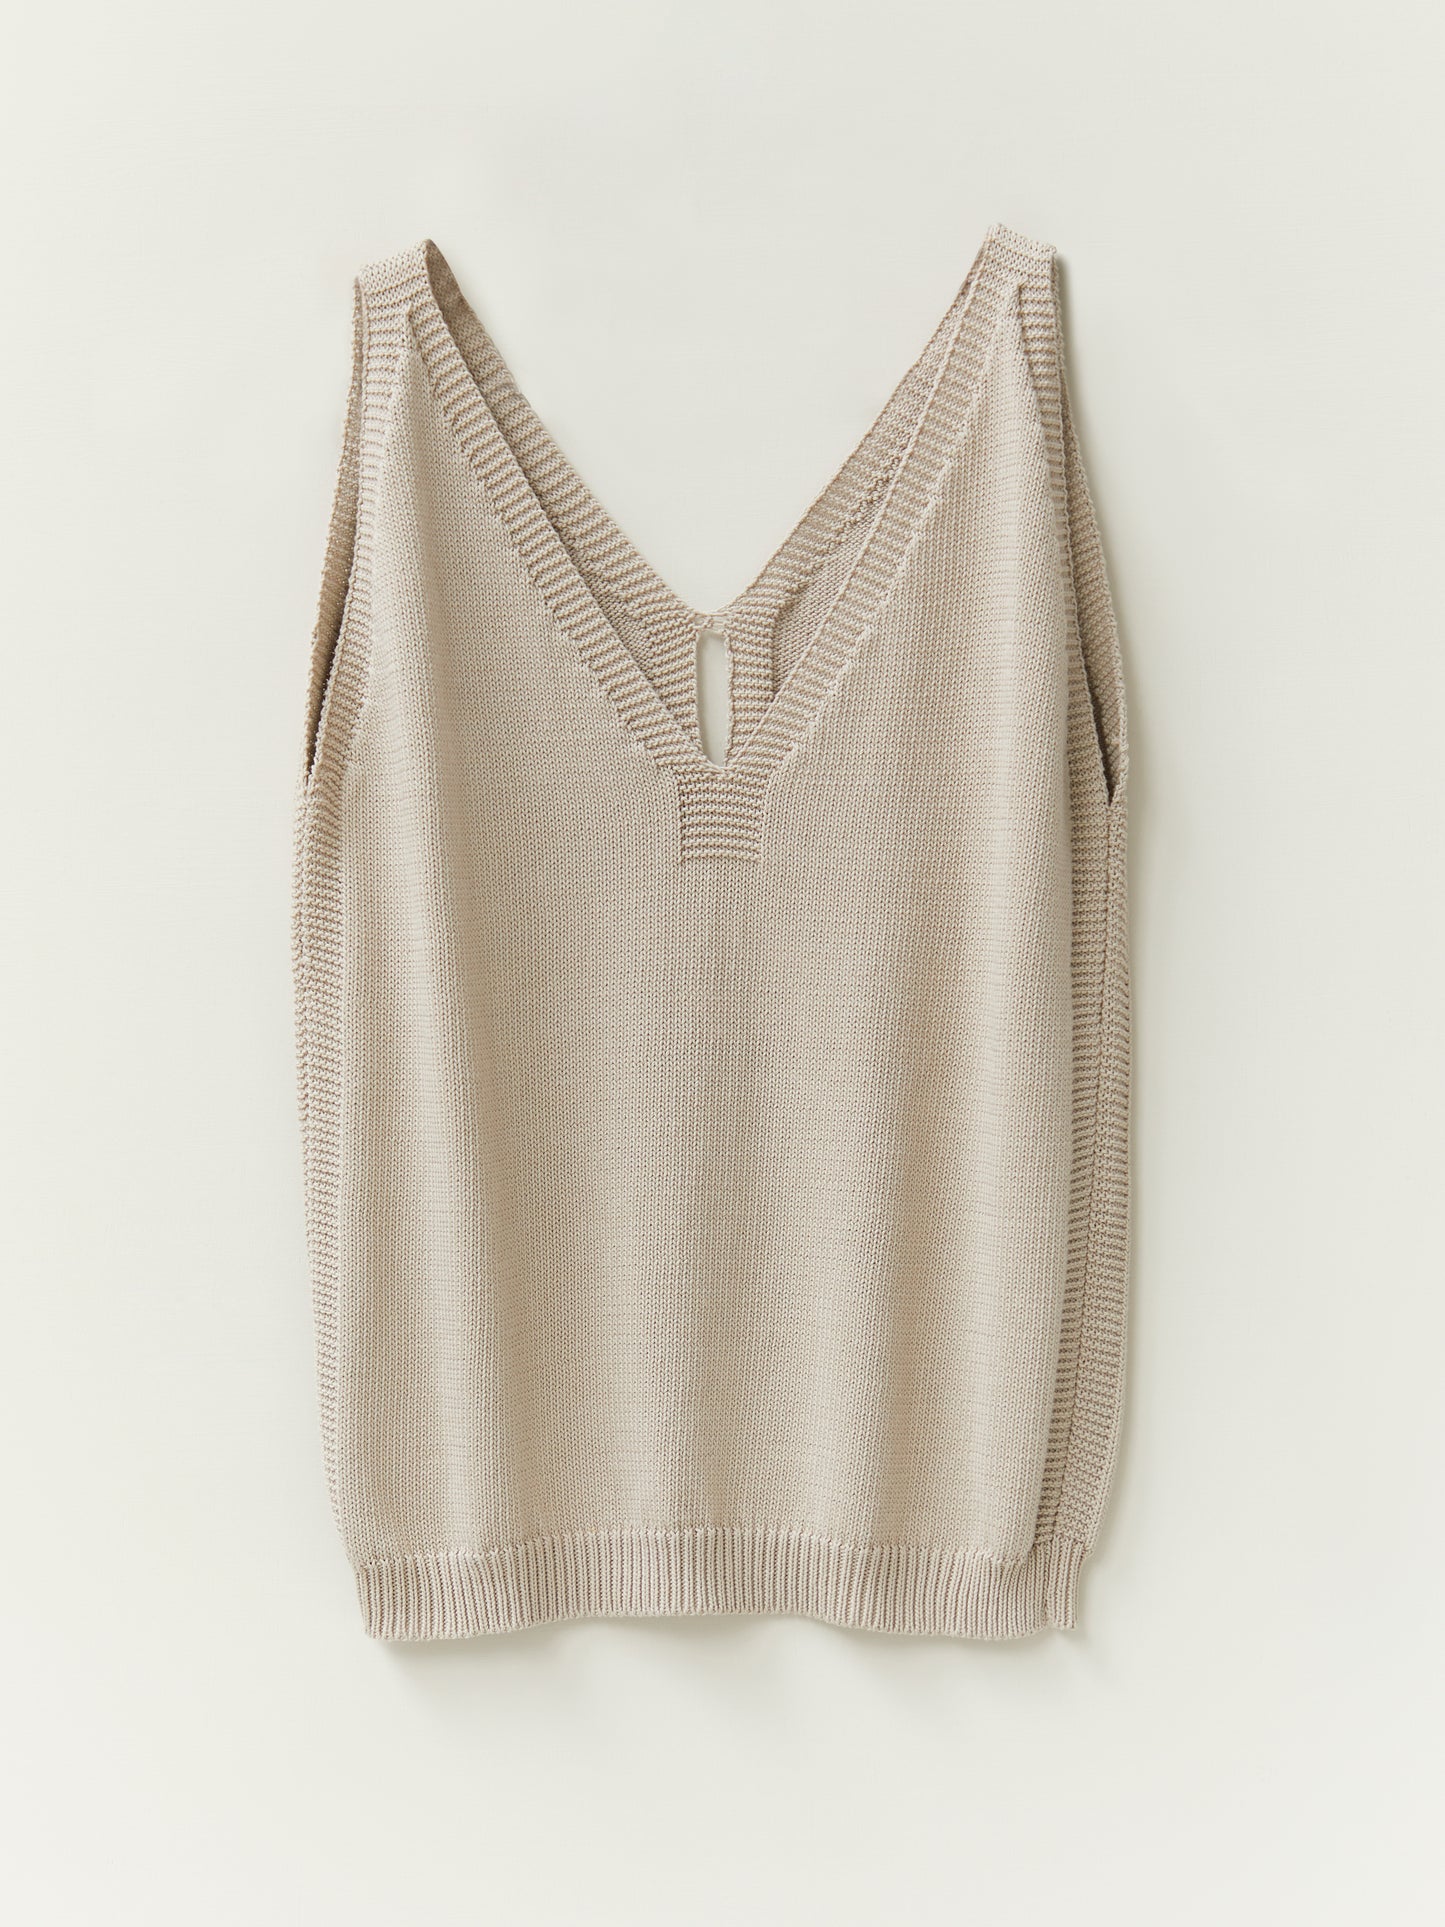 Organic Cotton Knitted Vest in Stone